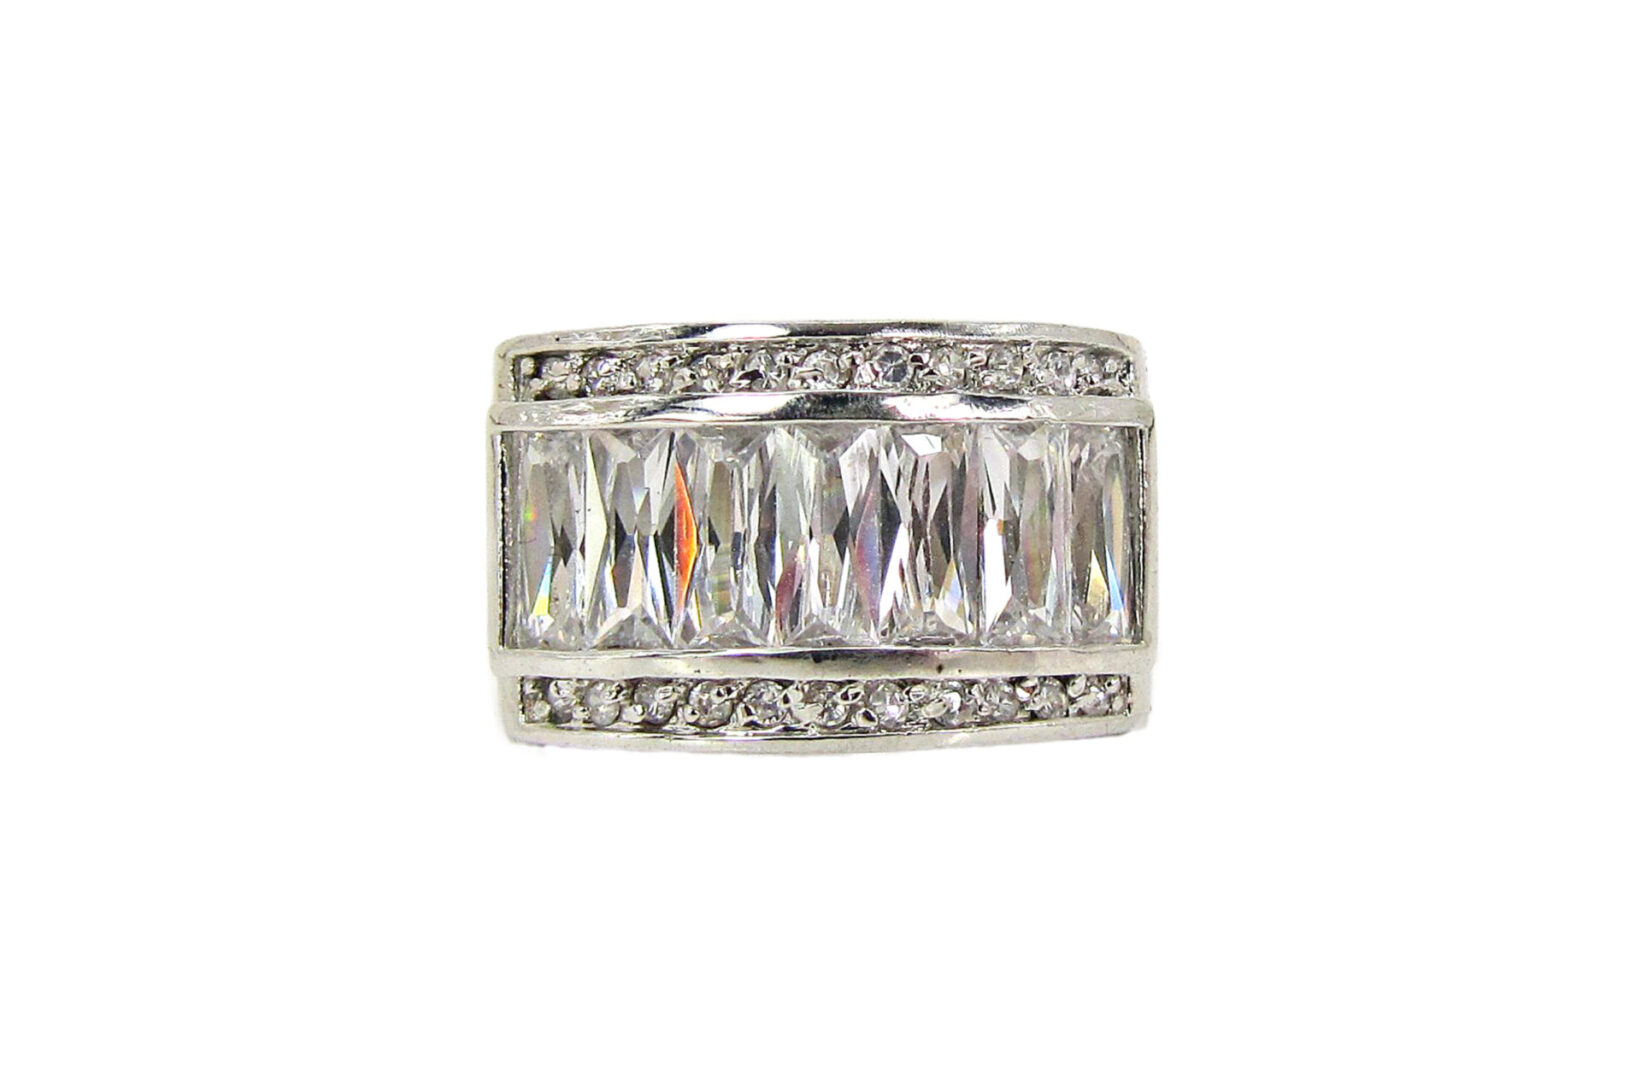 ring with rows of white rectangular crystals